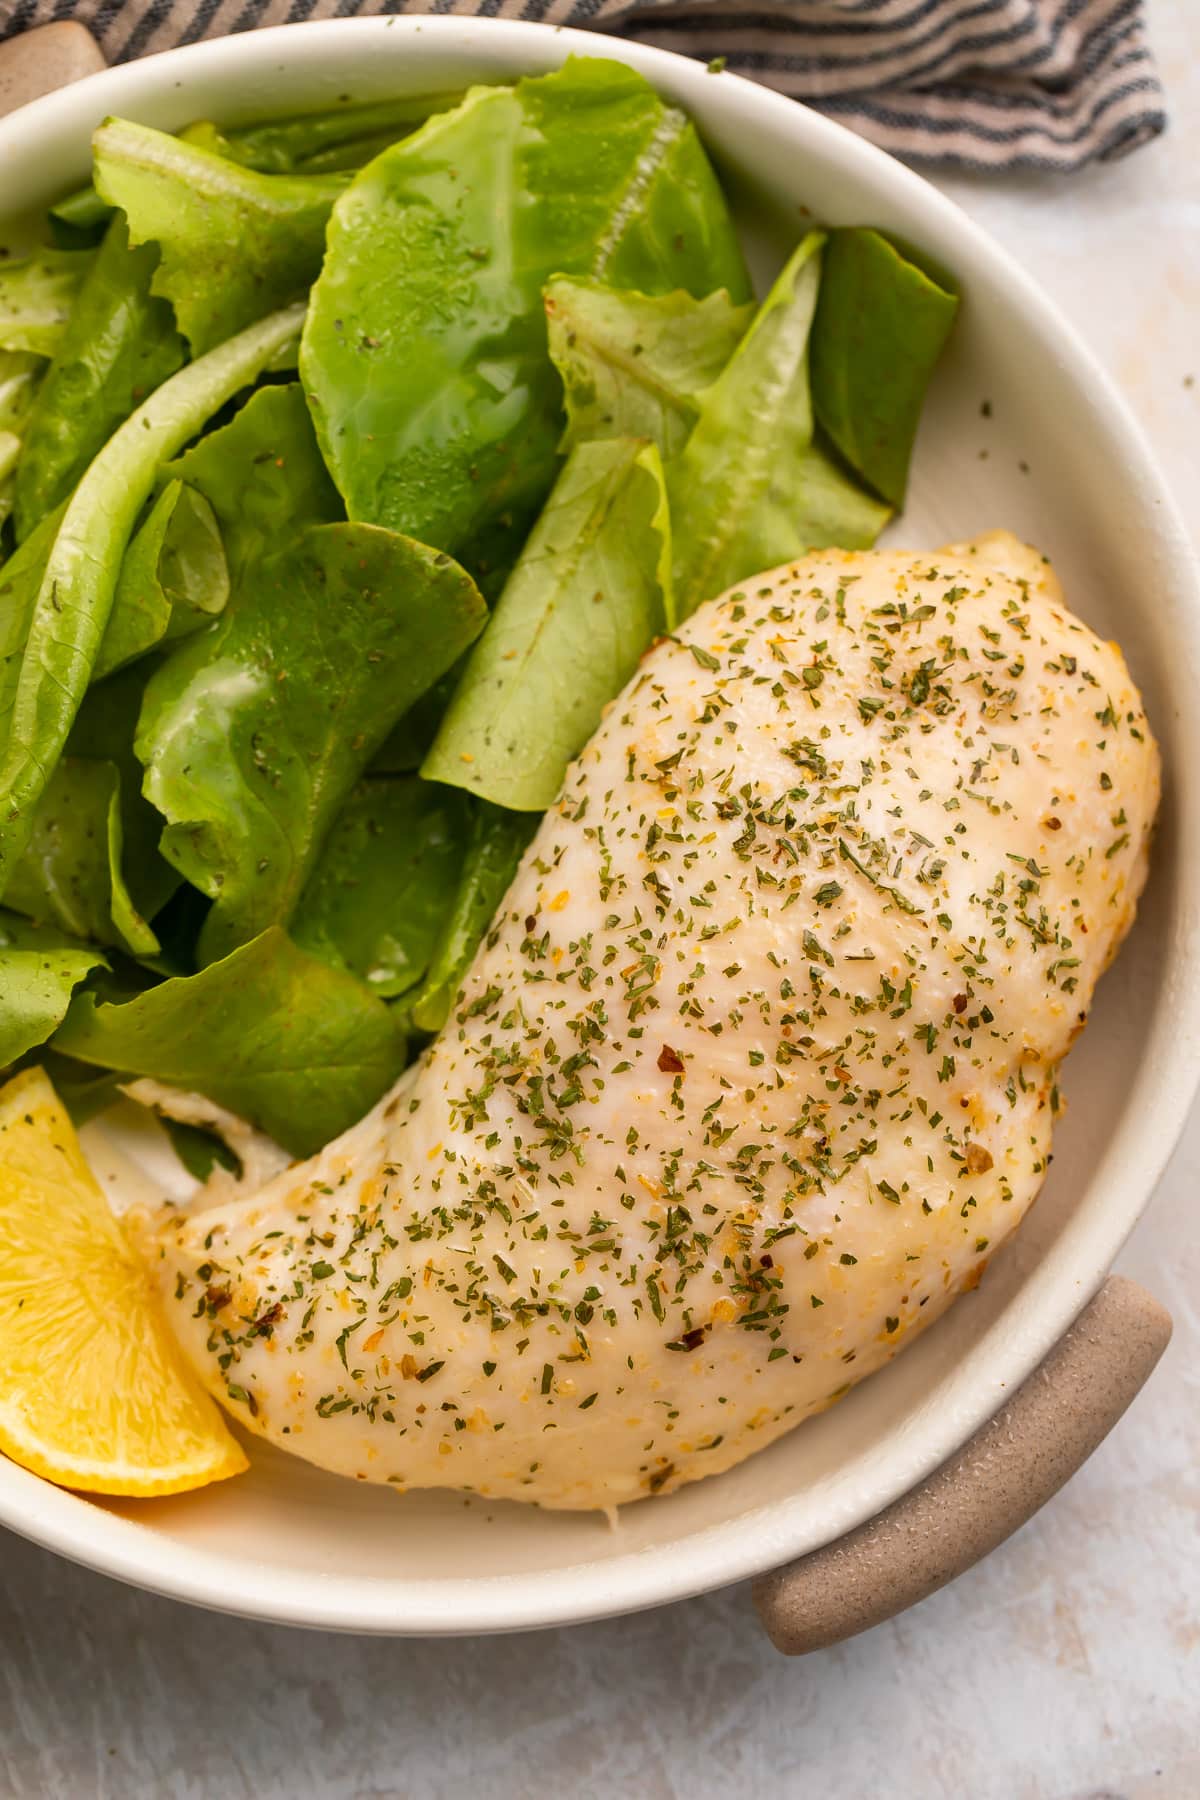 An Italian dressing chicken breast in a shallow bowl with a spinach side salad and a lemon wedge.